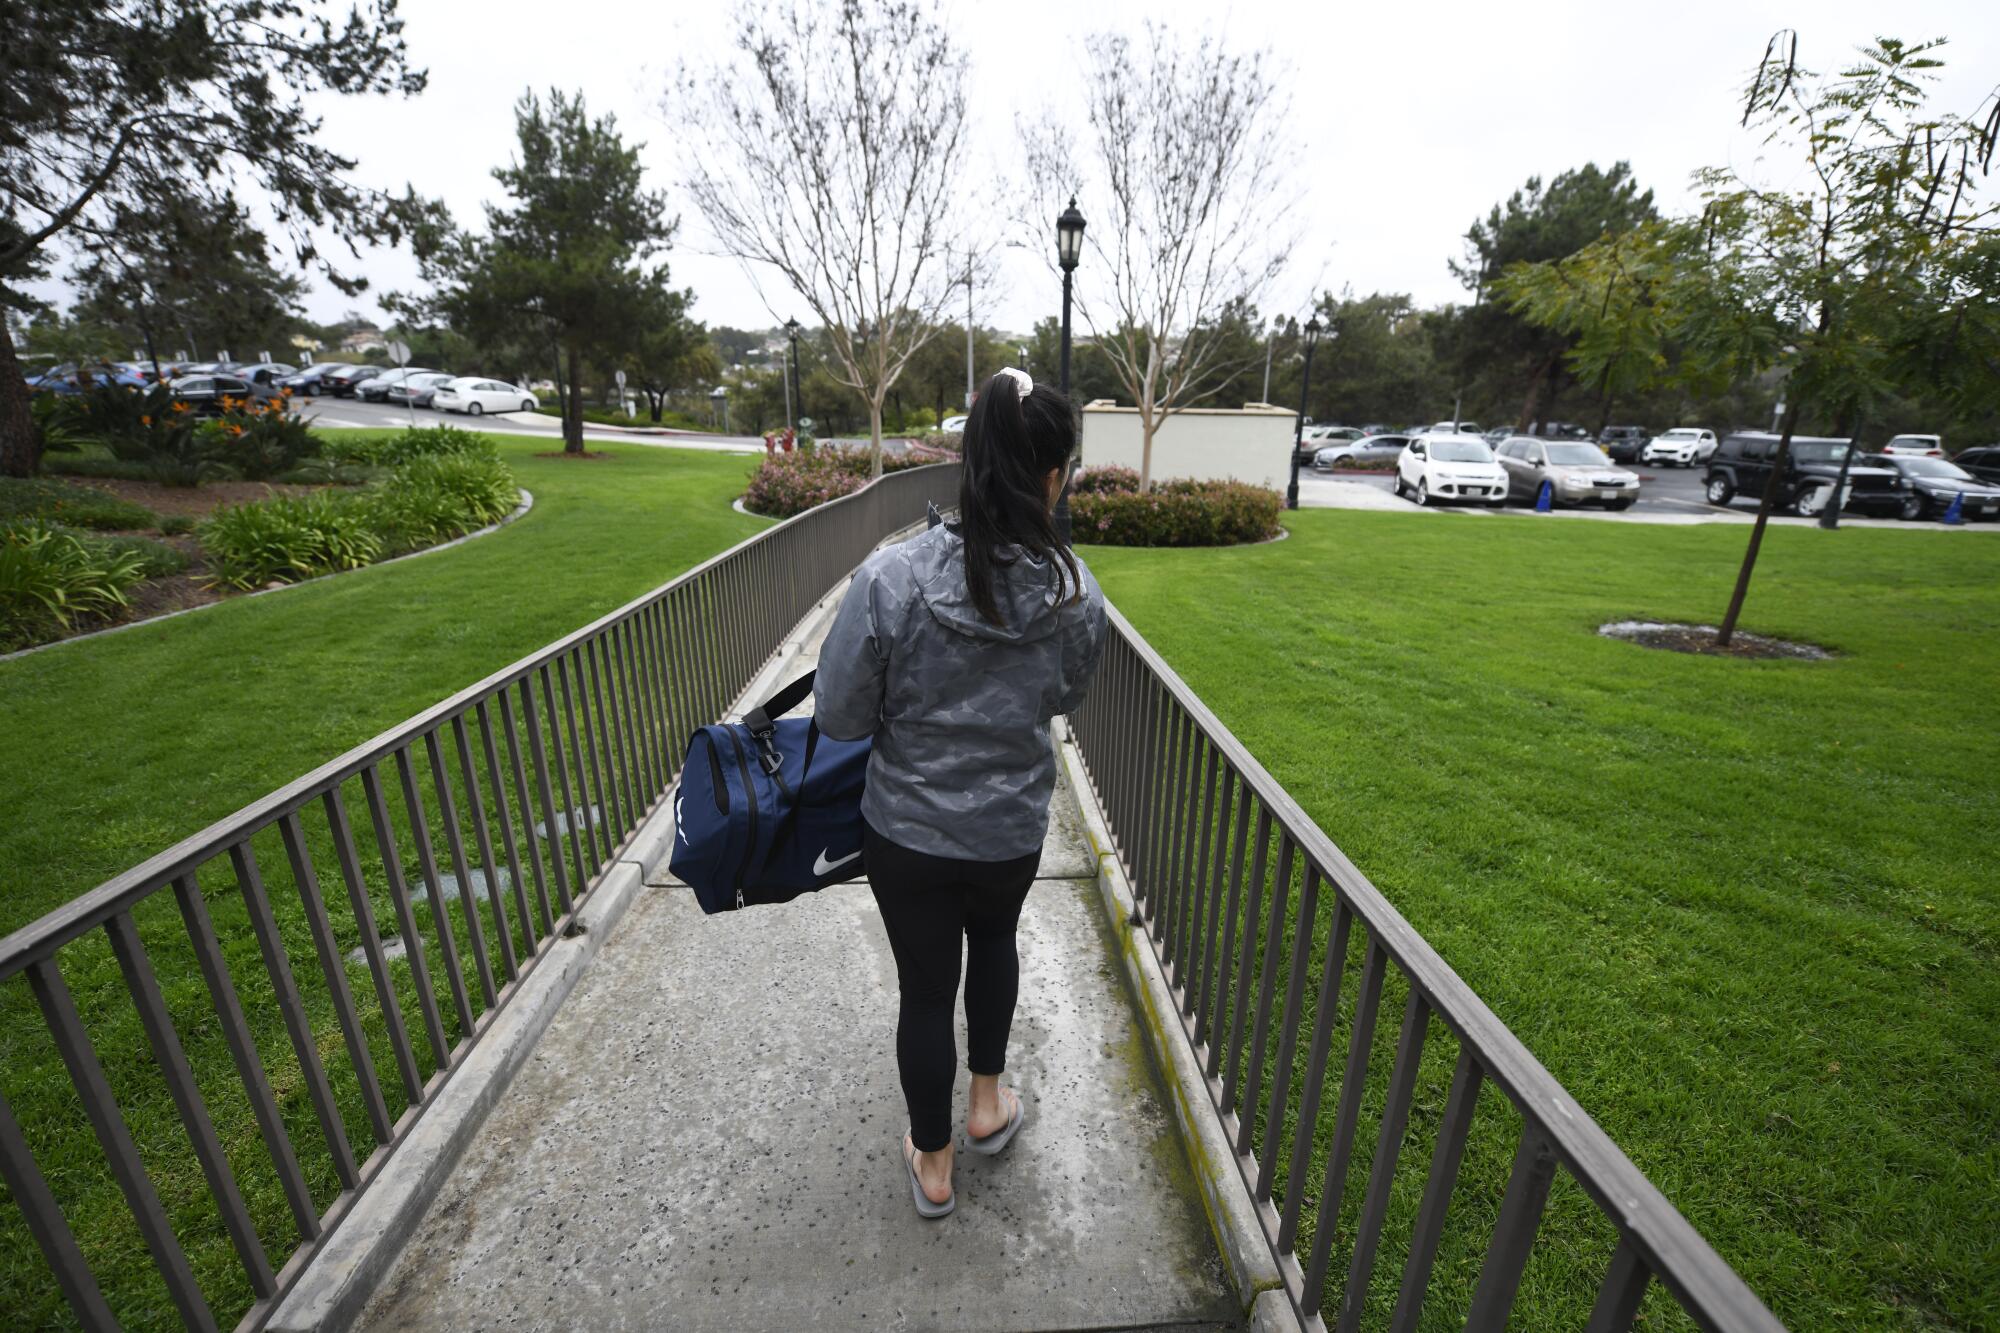 A student leaves University of San Diego dorms carrying a duffel bag